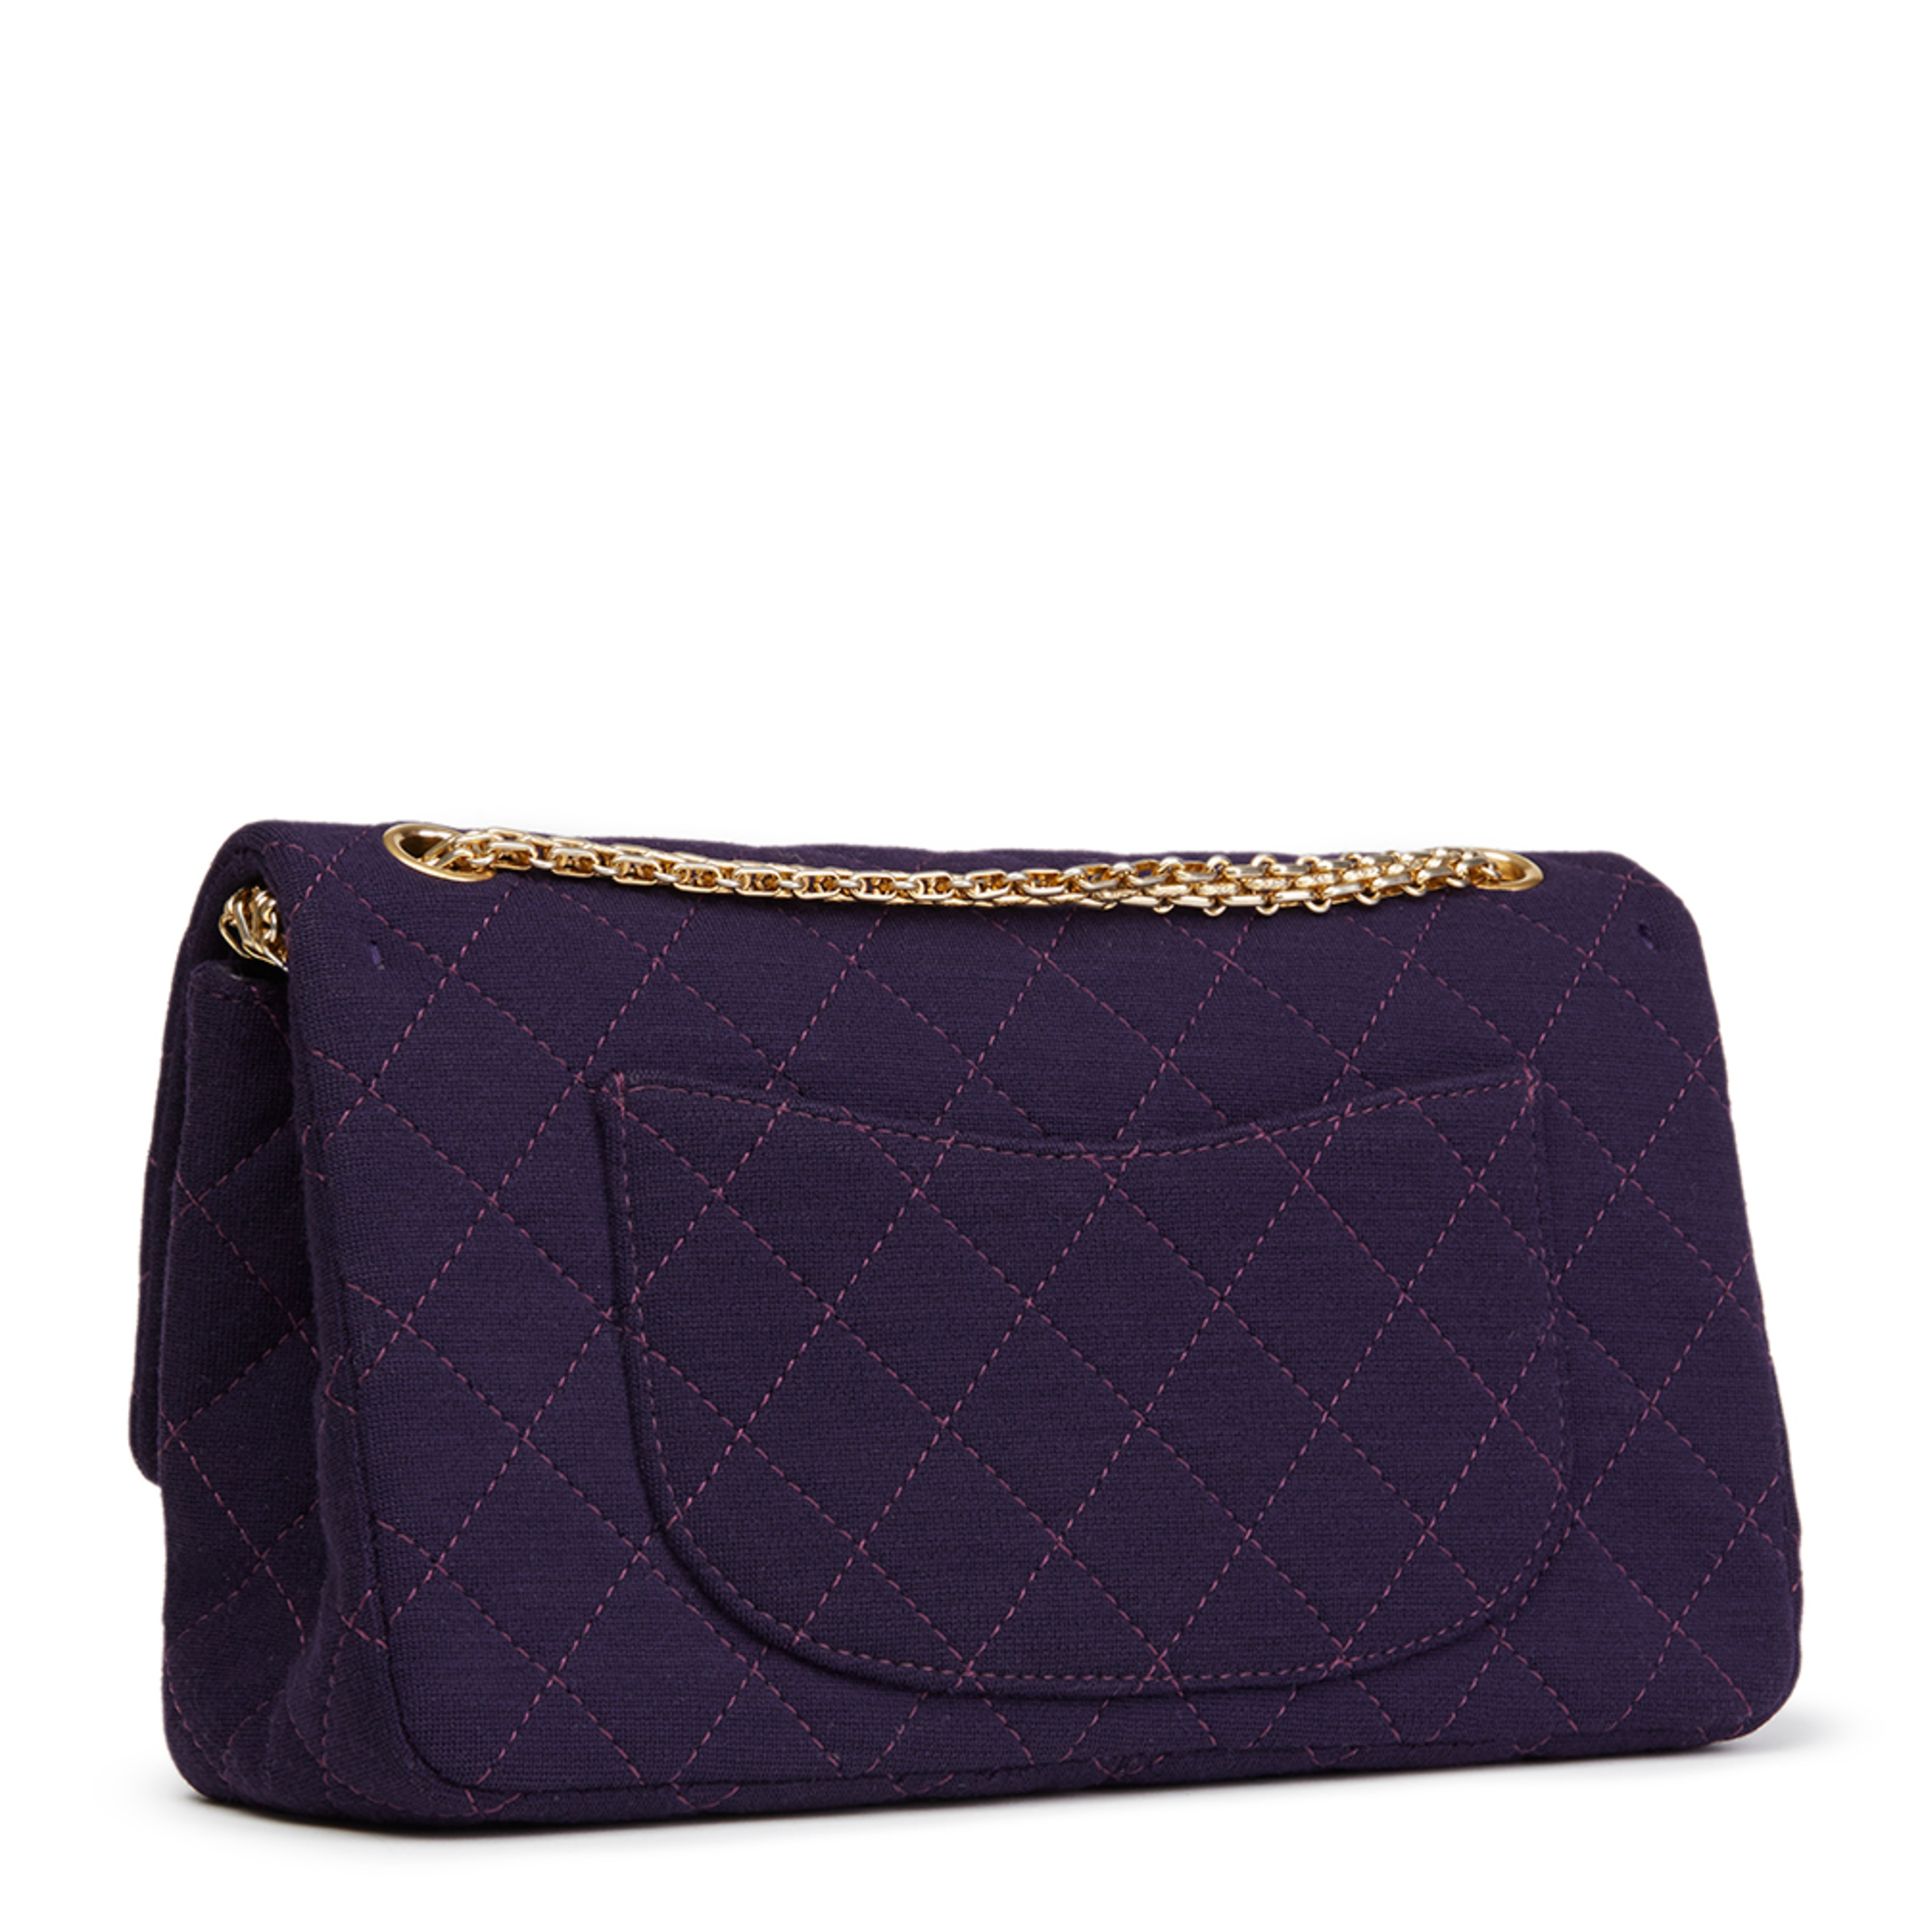 Violet Quilted Jersey Fabric 2.55 Reissue 226 Double Flap Bag - Image 4 of 10